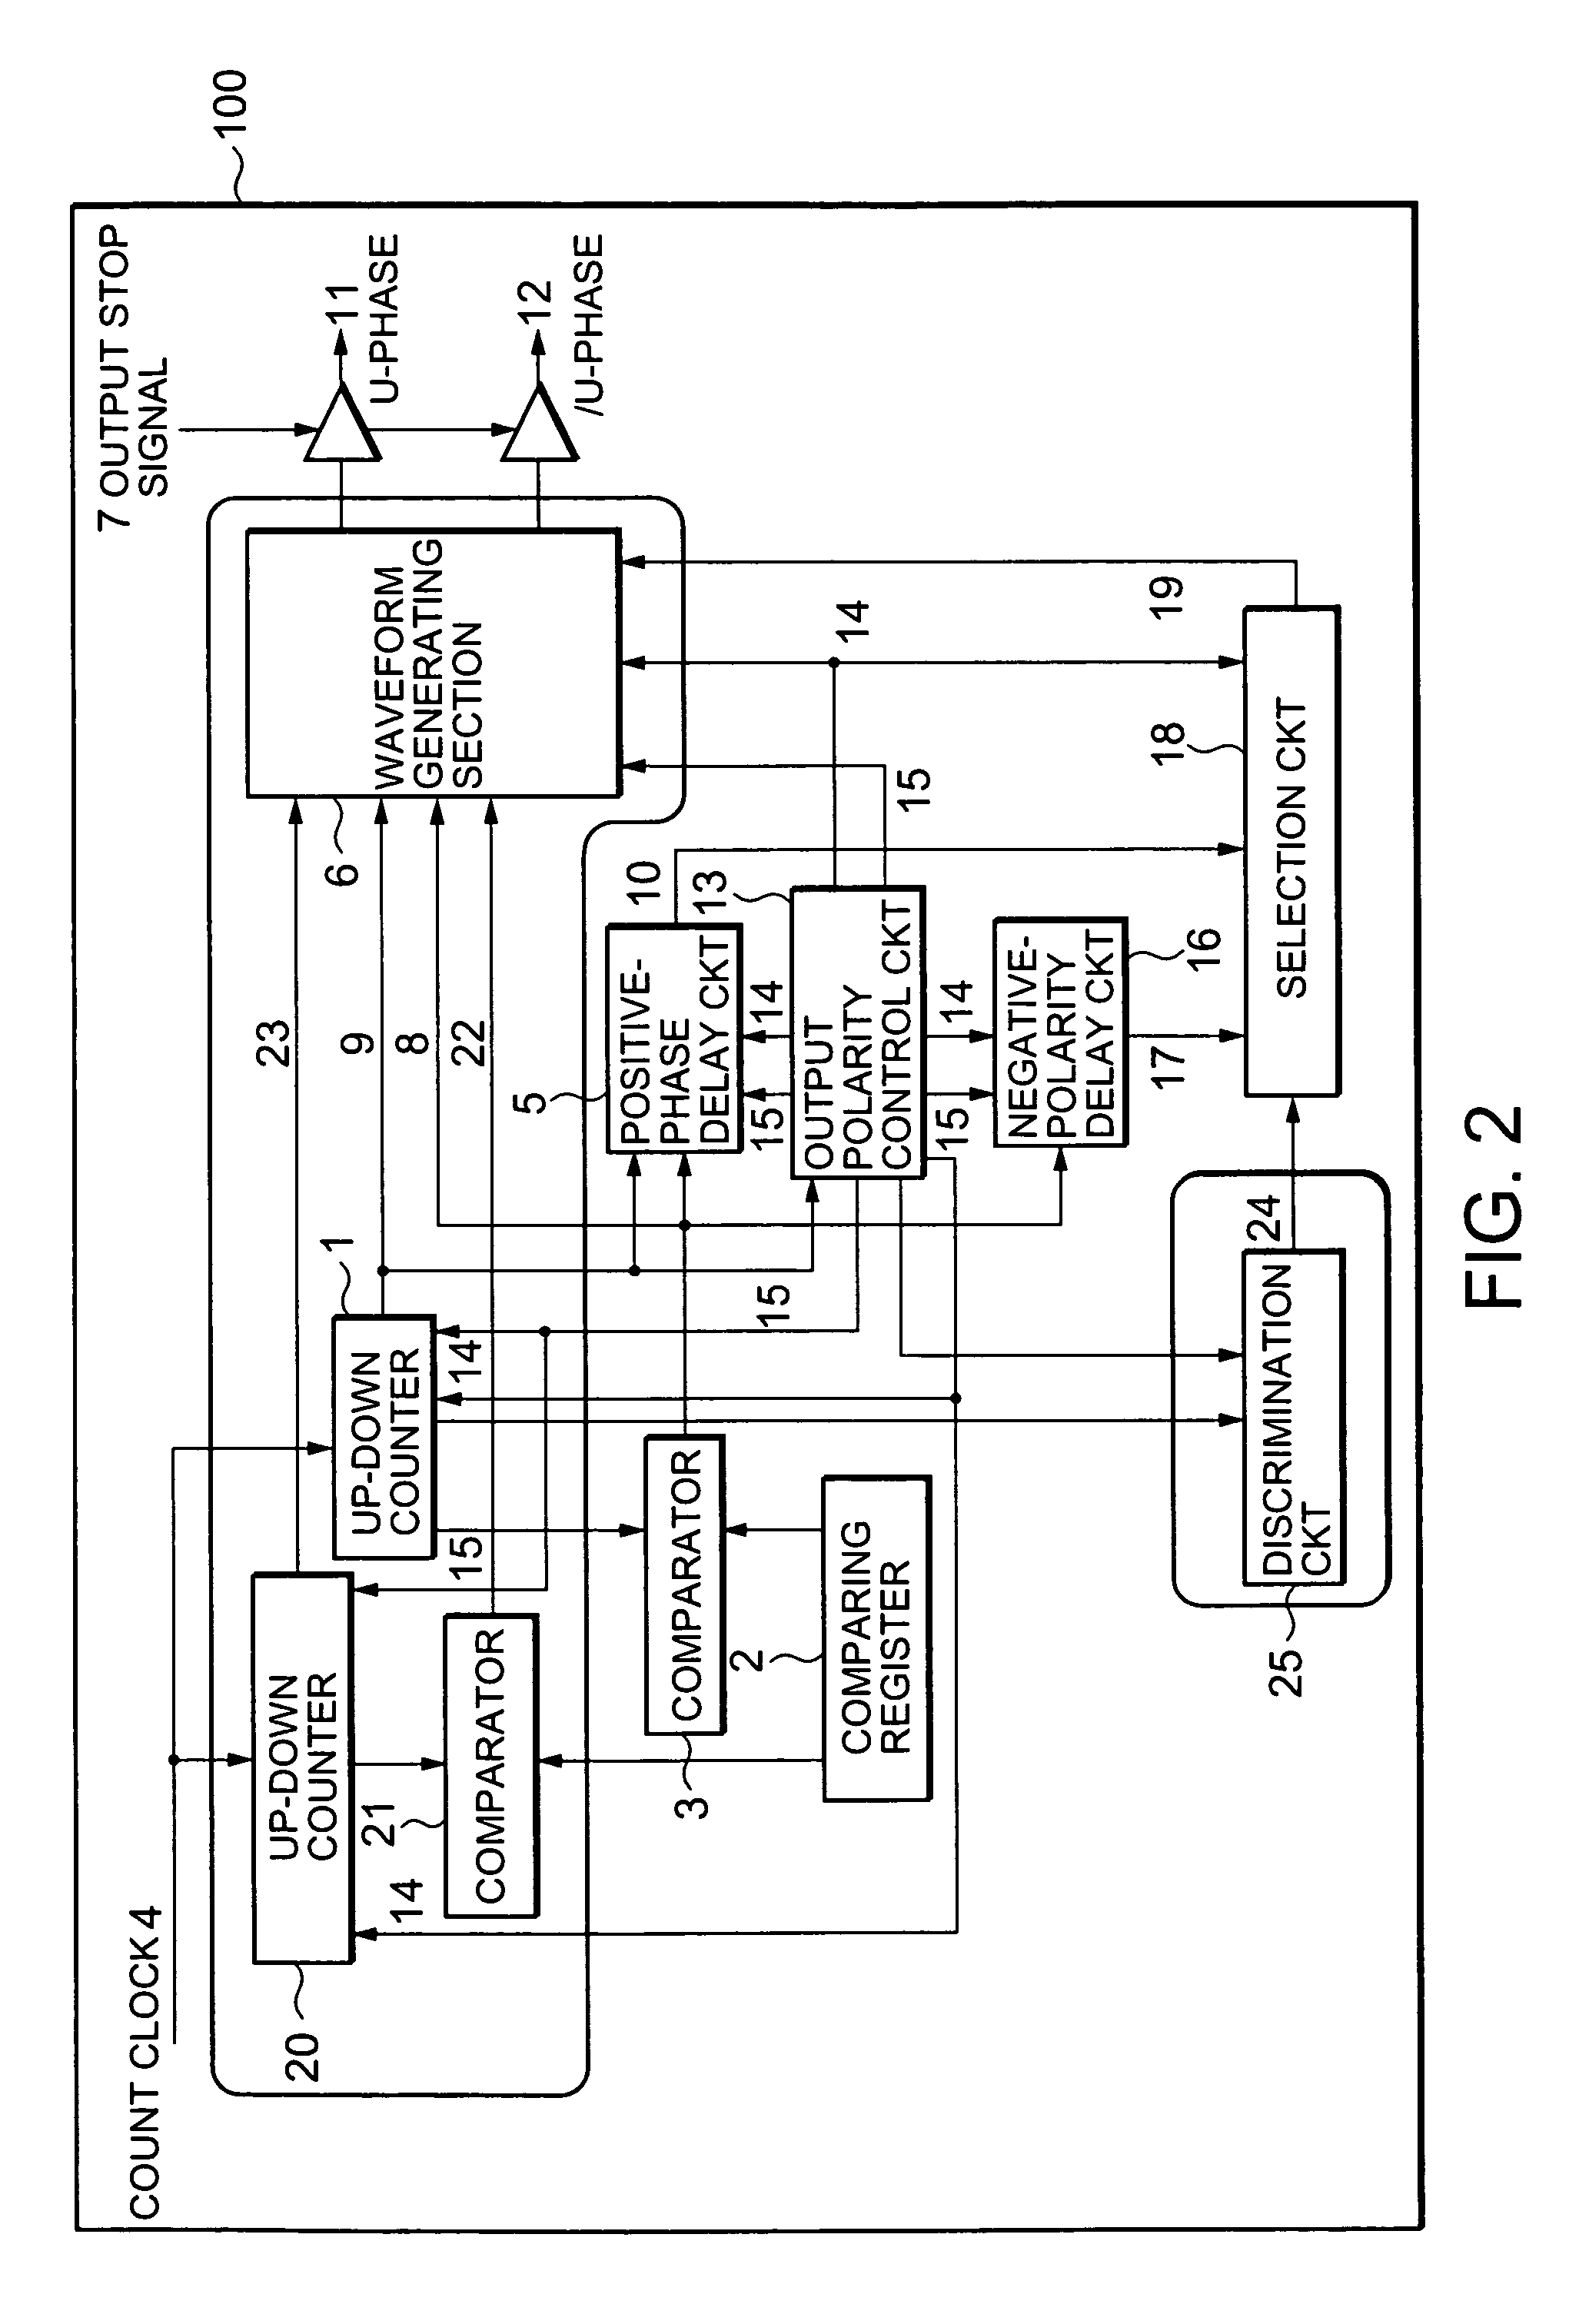 Method and apparatus for generating pulse-width modulated waveform